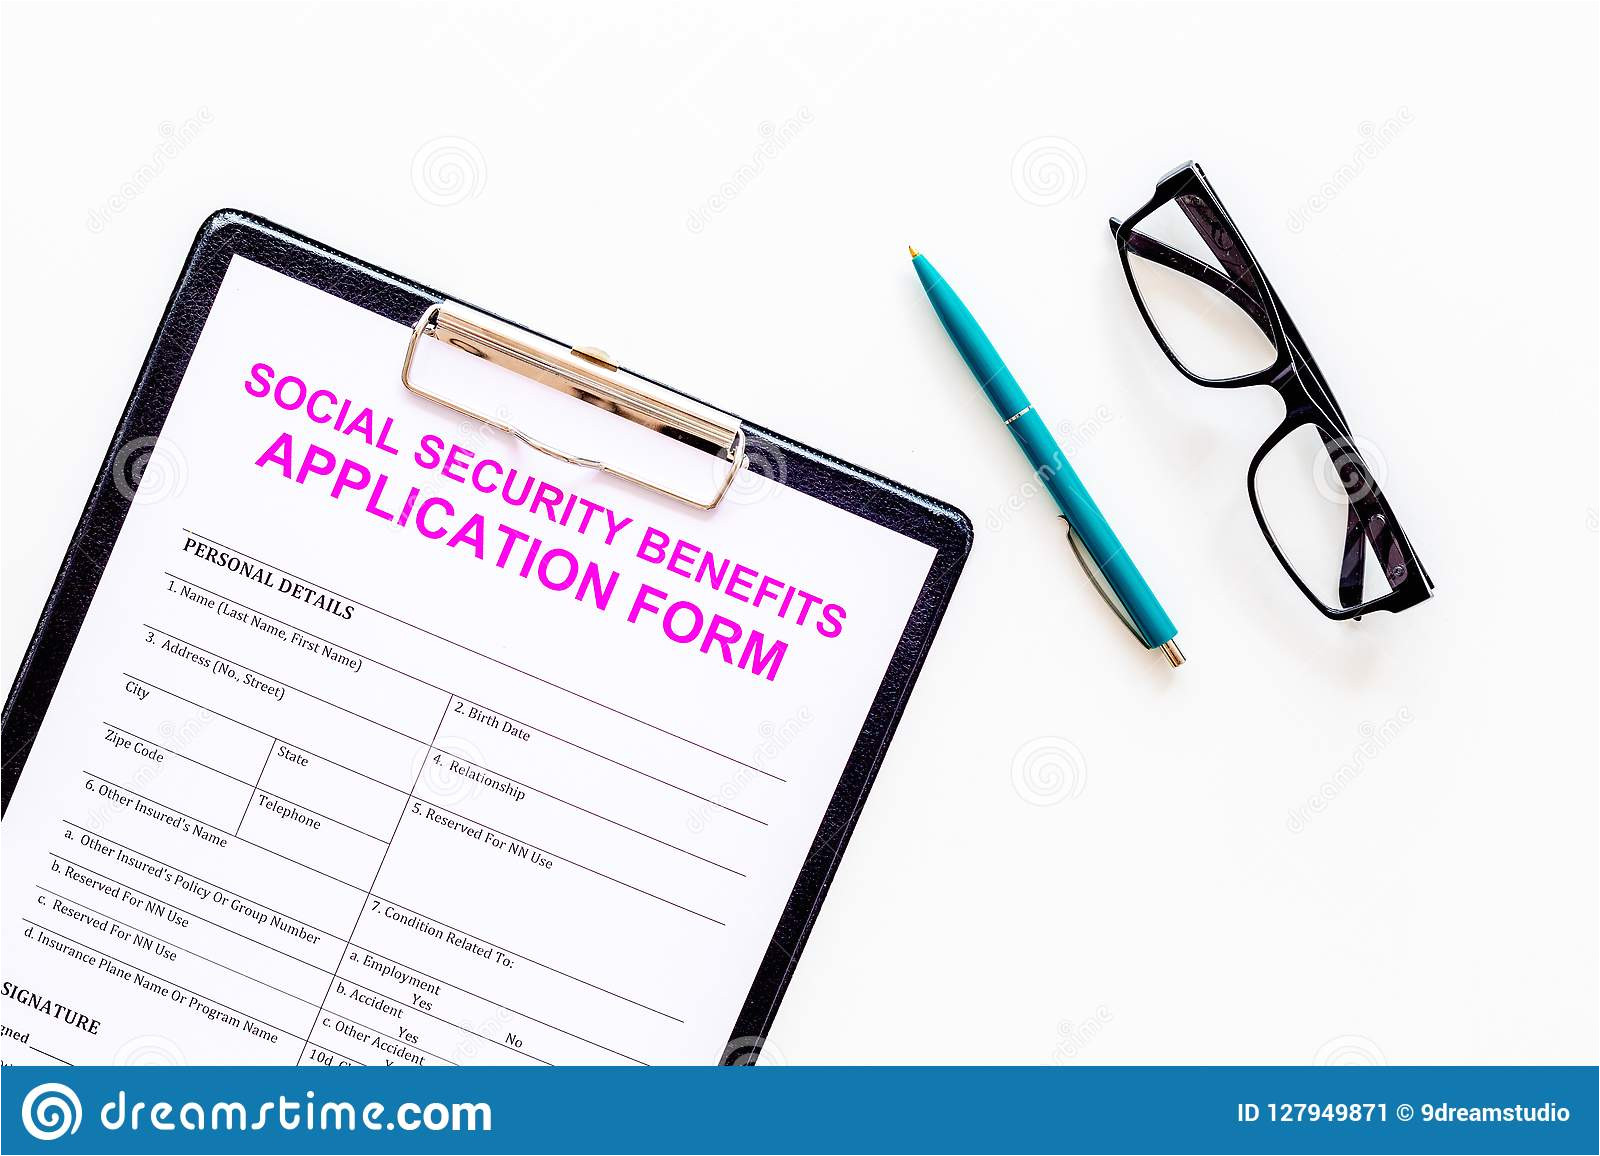 social security benefits application form near pen glasses white background top view space text 127949871 jpg